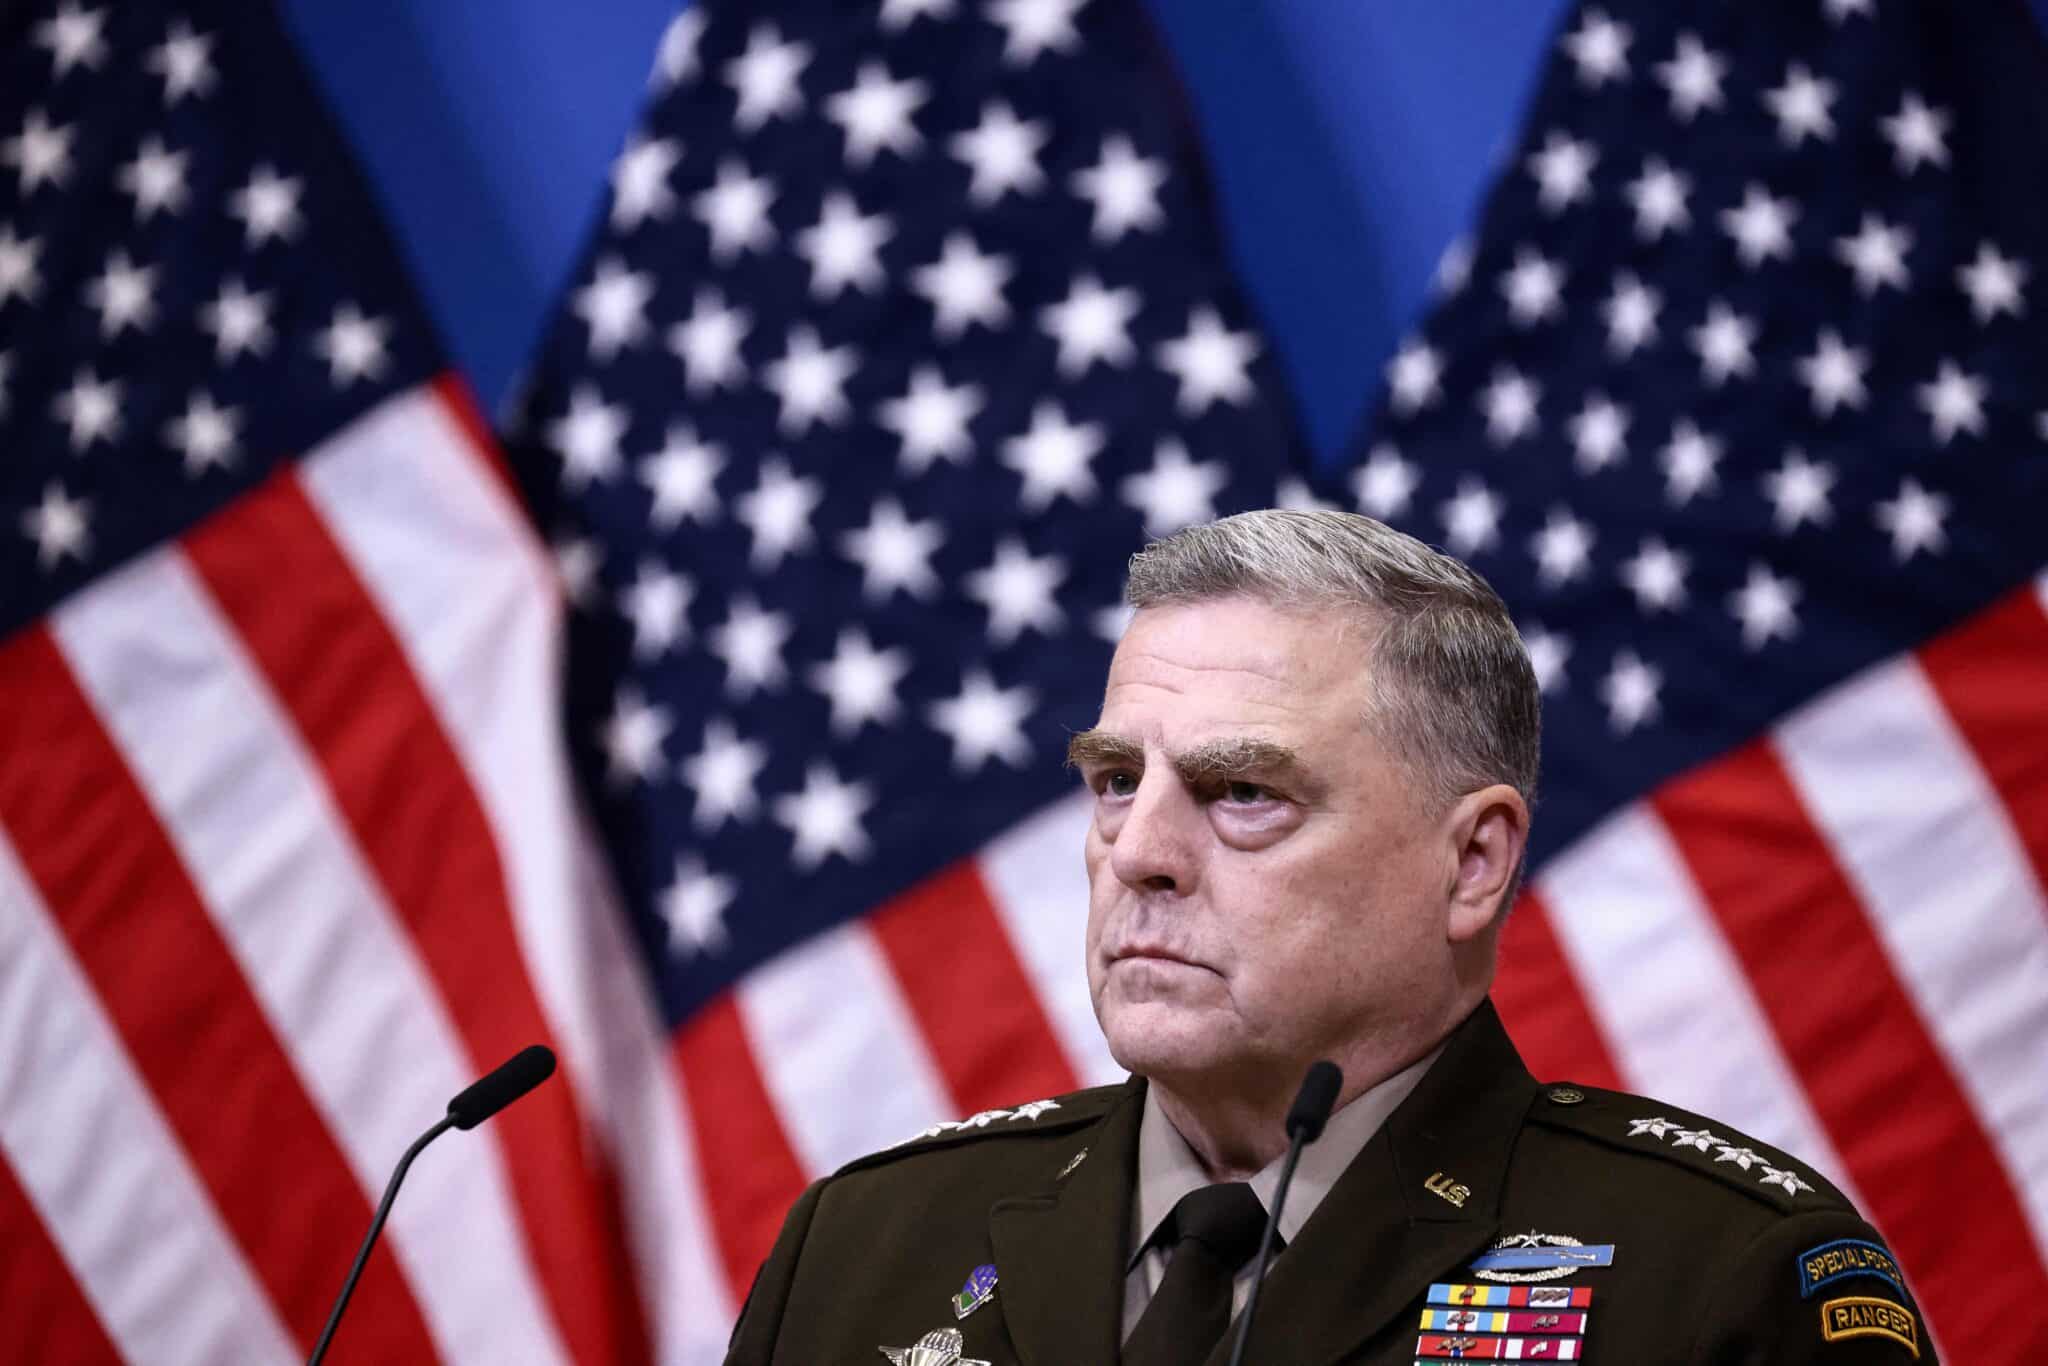 US Chairman of the Joint Chiefs of Staff, General Mark Milley gives a press conference after a meeting of the Ukraine Defense Contact Group during a two-day meeting of the alliance's Defence Ministers at the NATO Headquarter in Brussels on October 12, 2022. (Photo by Kenzo TRIBOUILLARD / AFP) (Photo by KENZO TRIBOUILLARD/AFP via Getty Images)